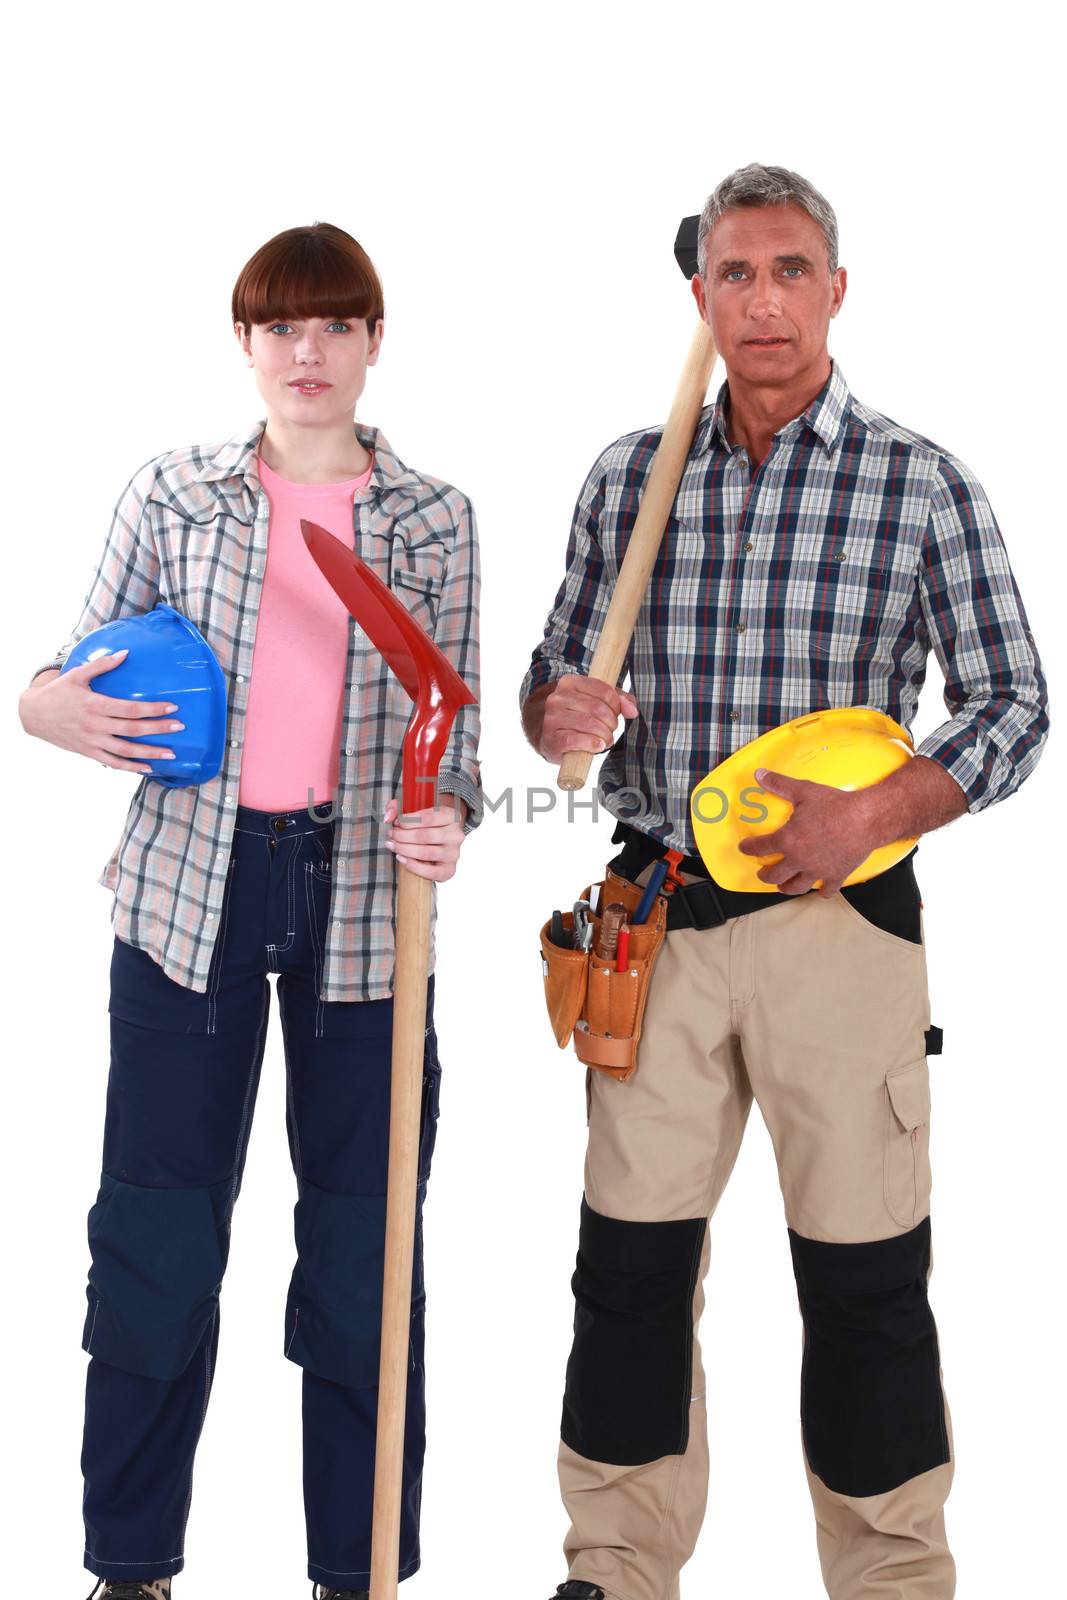 Couple ready for DIY project